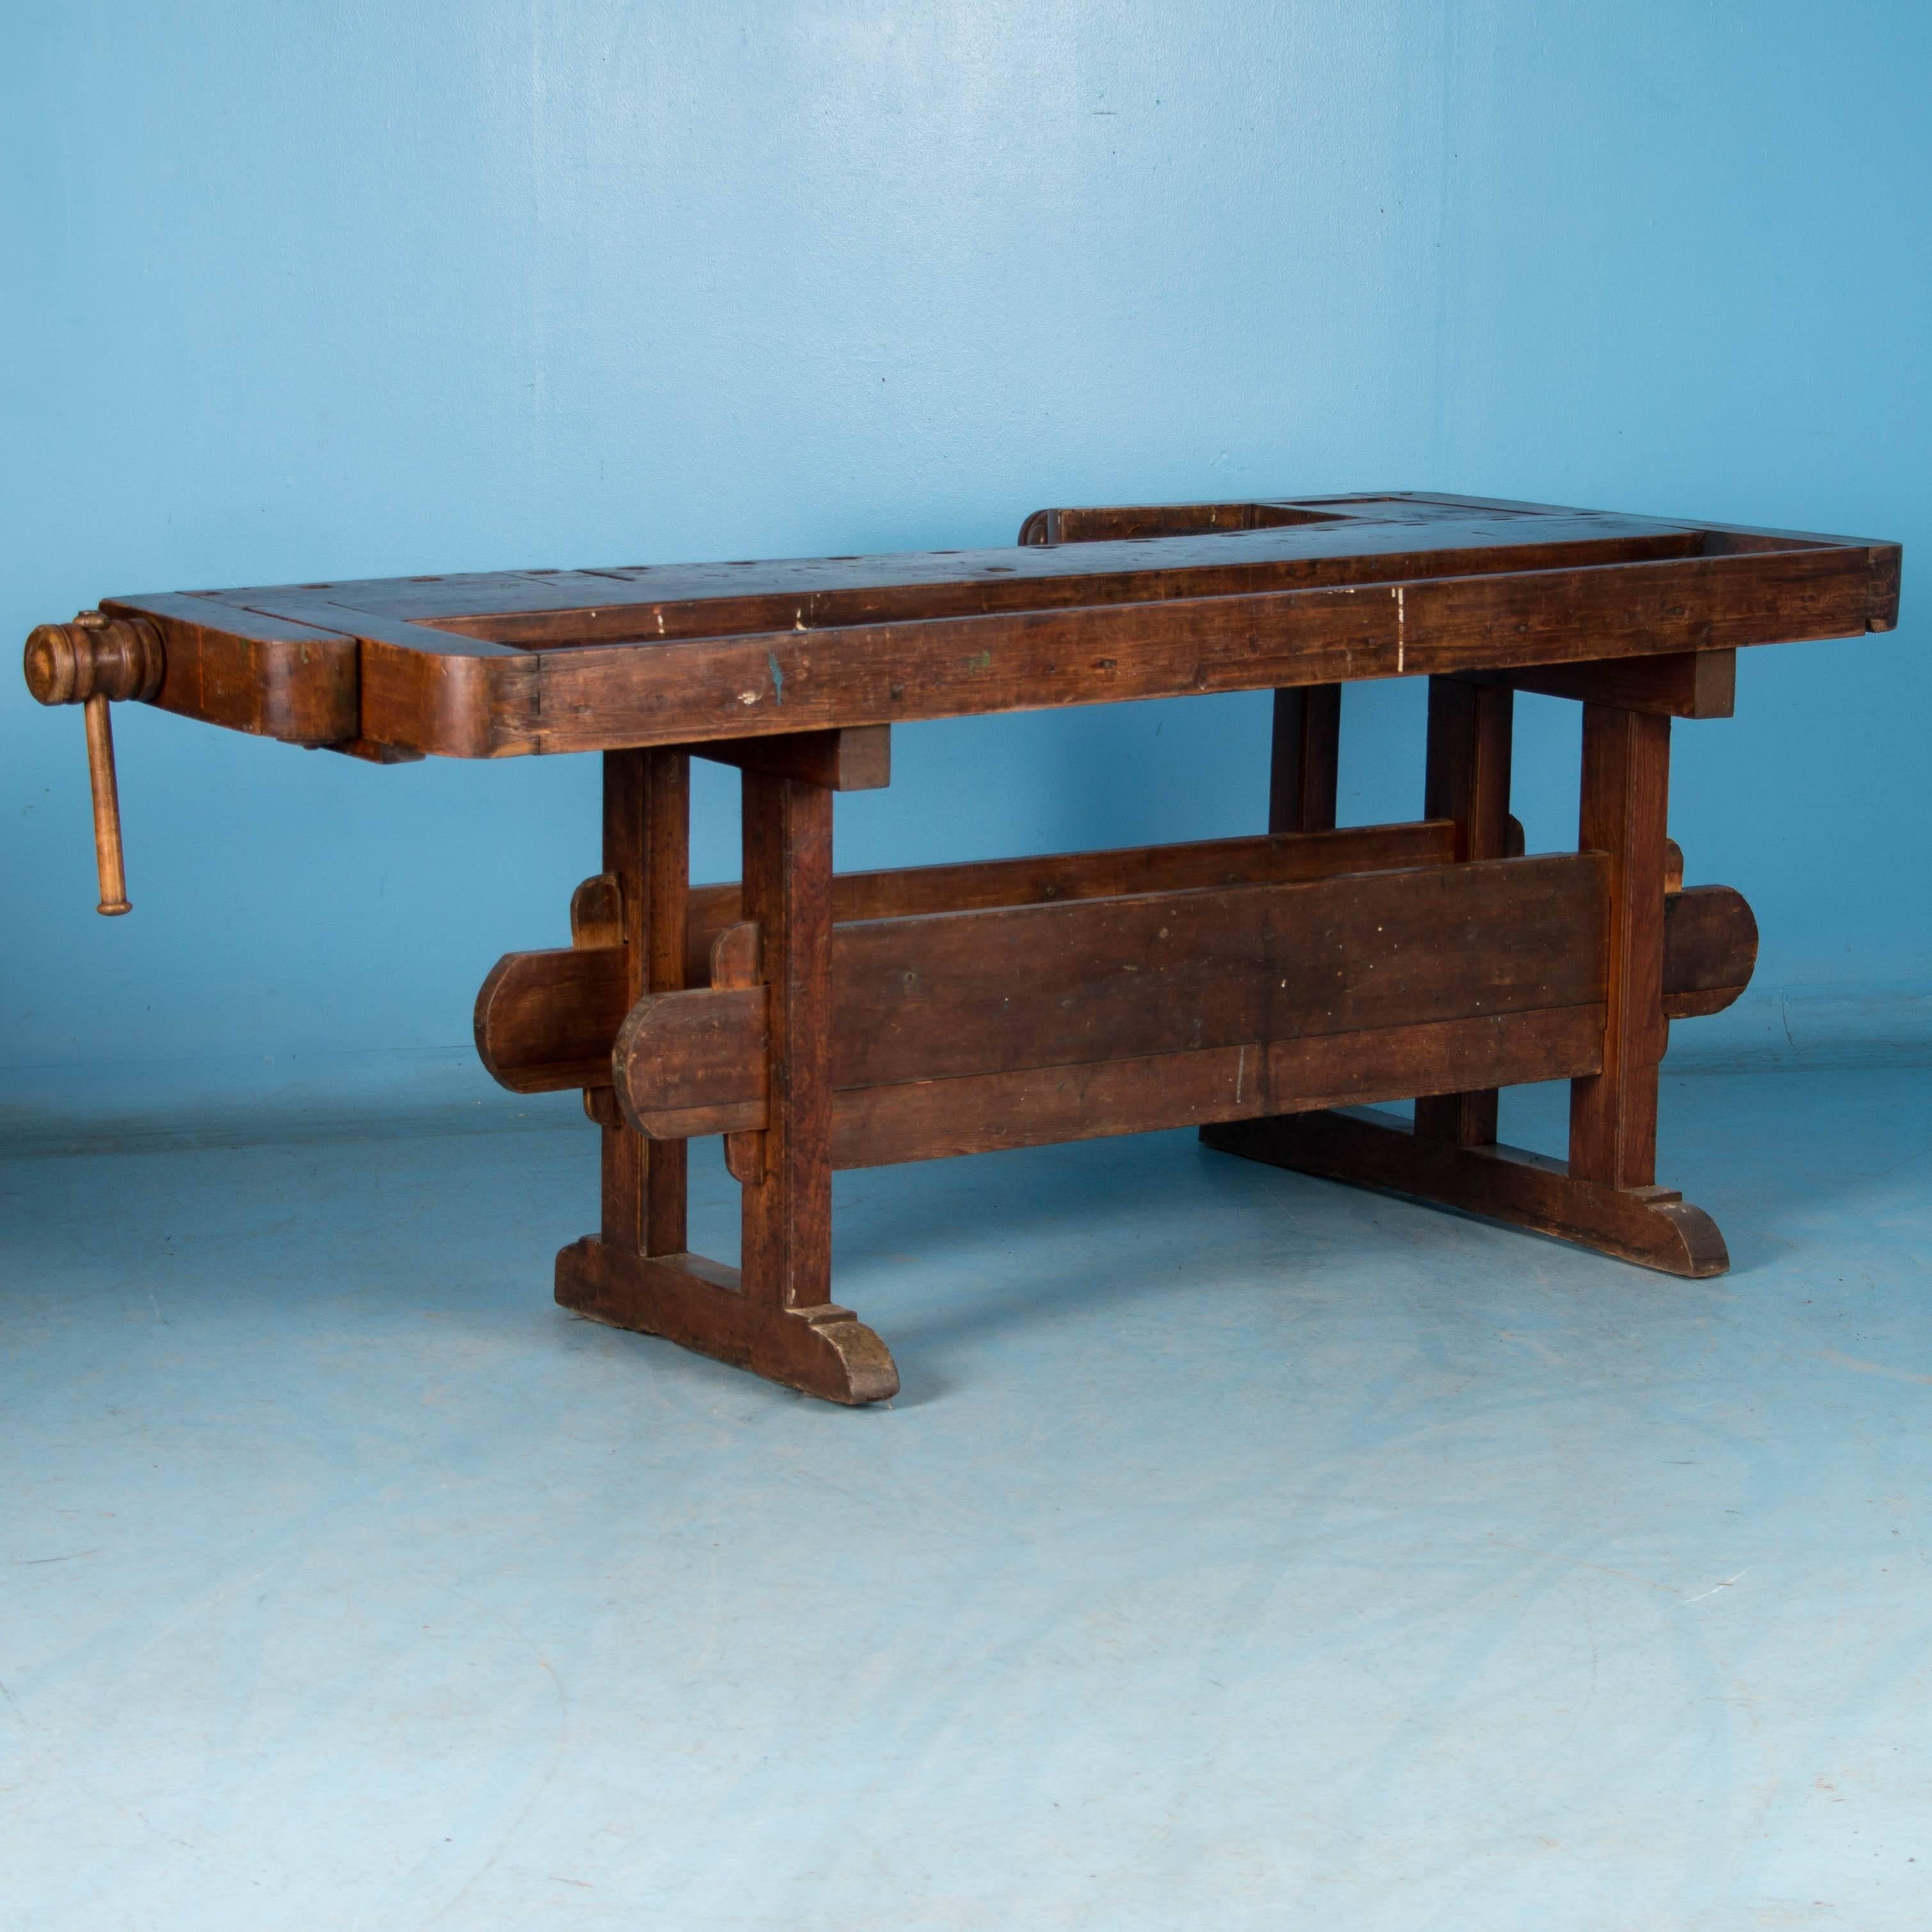 Hungarian Antique Danish Carpenter's Workbench or Console Table